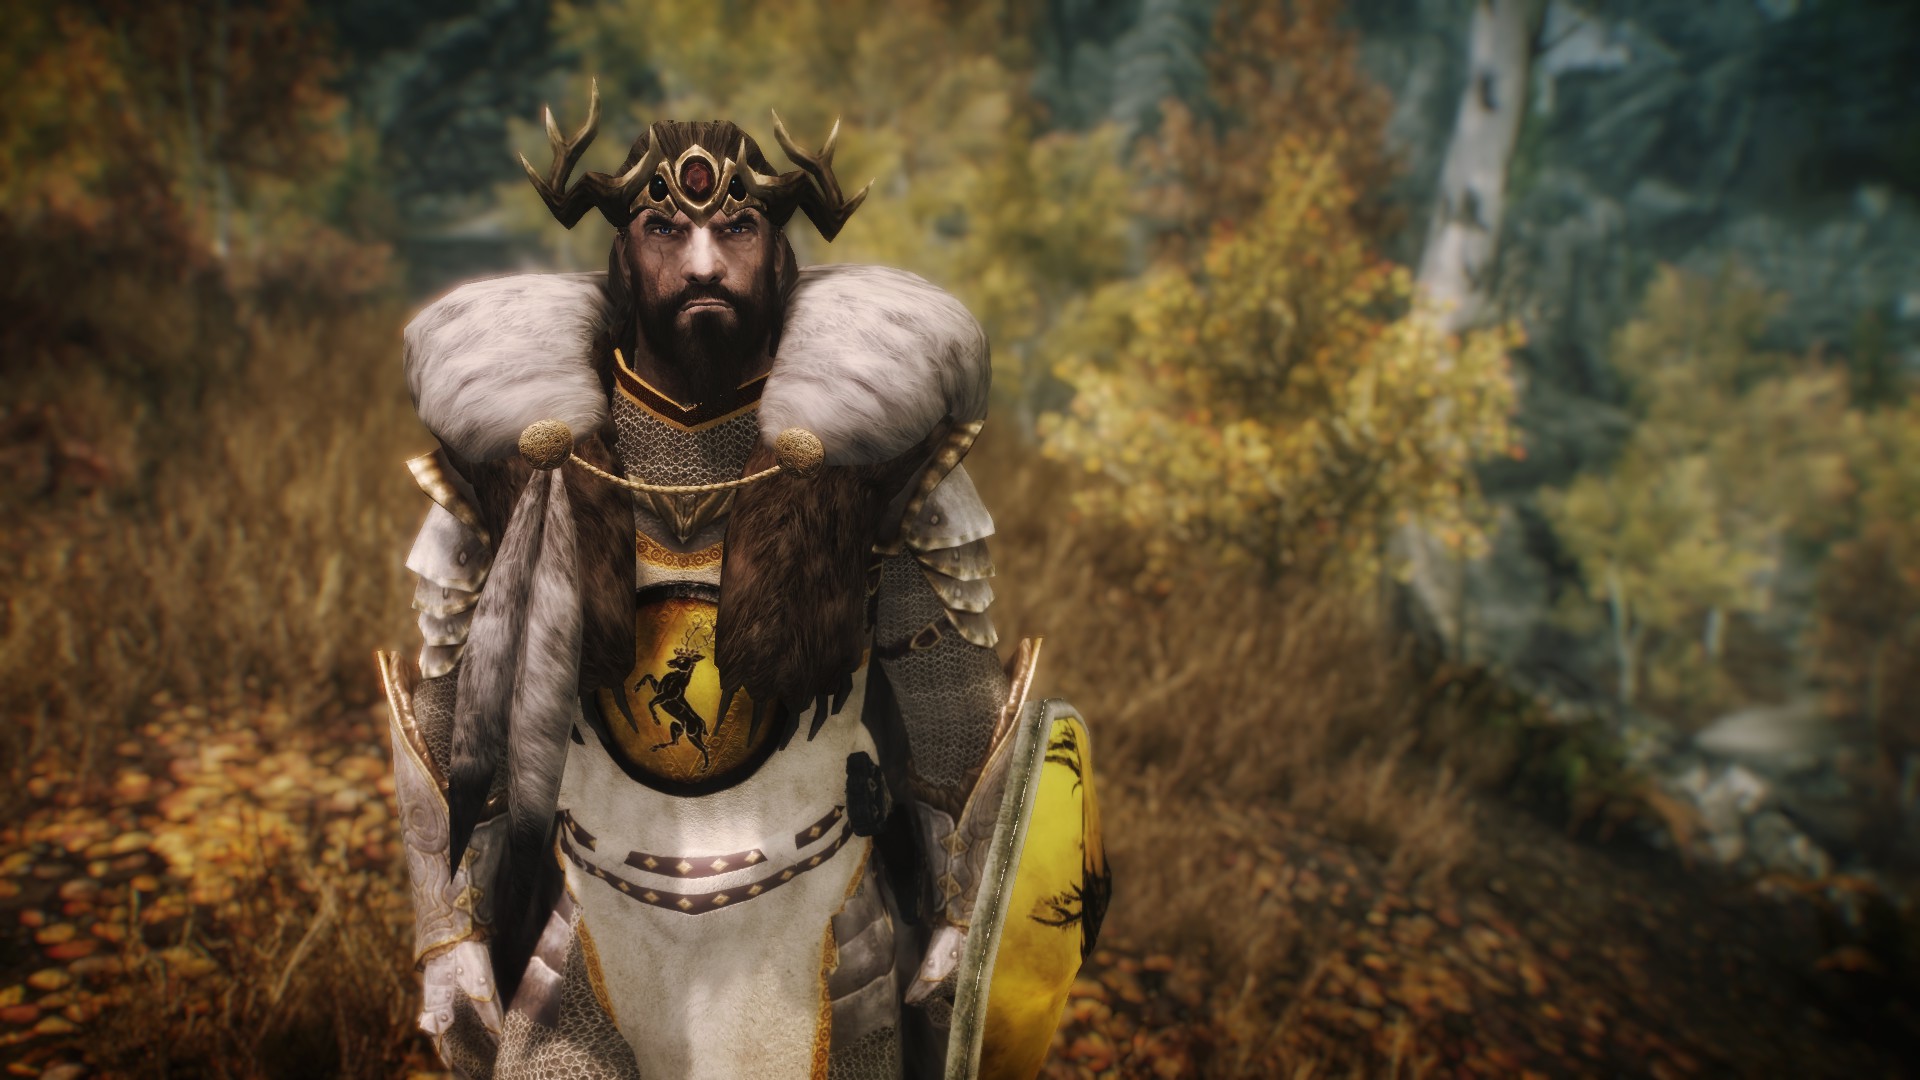 skyrim lord of the rings armor